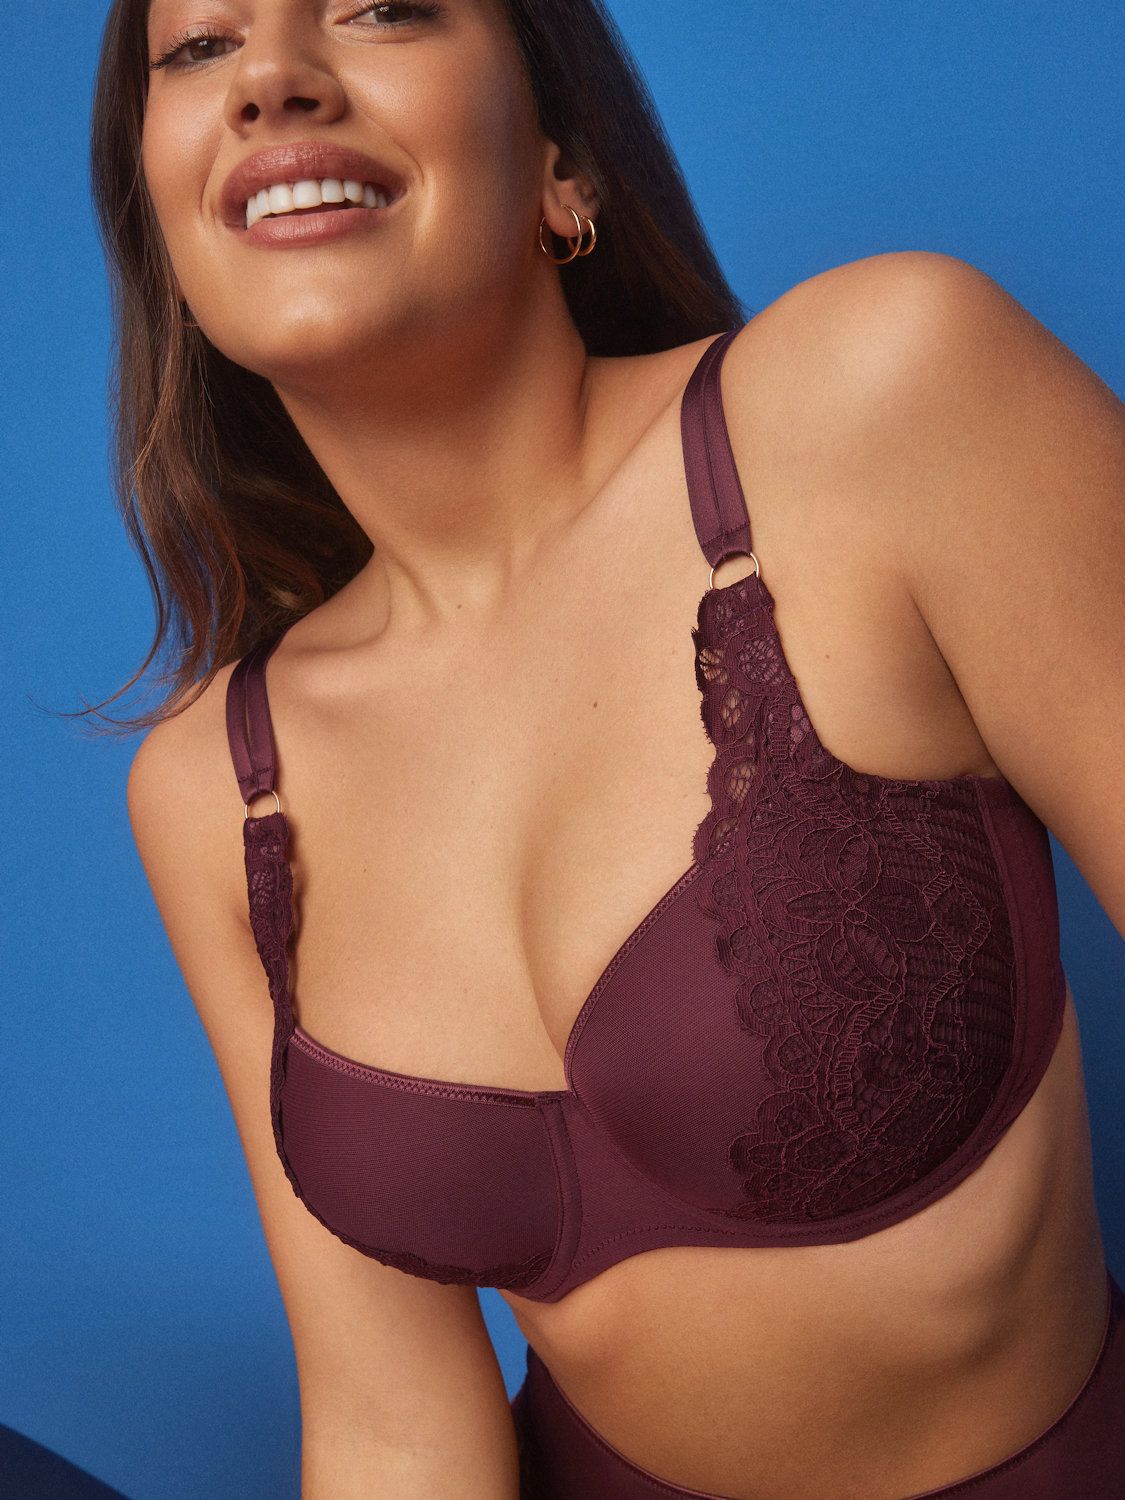 Should You Buy A Bra Without Trying It On First? - ParfaitLingerie